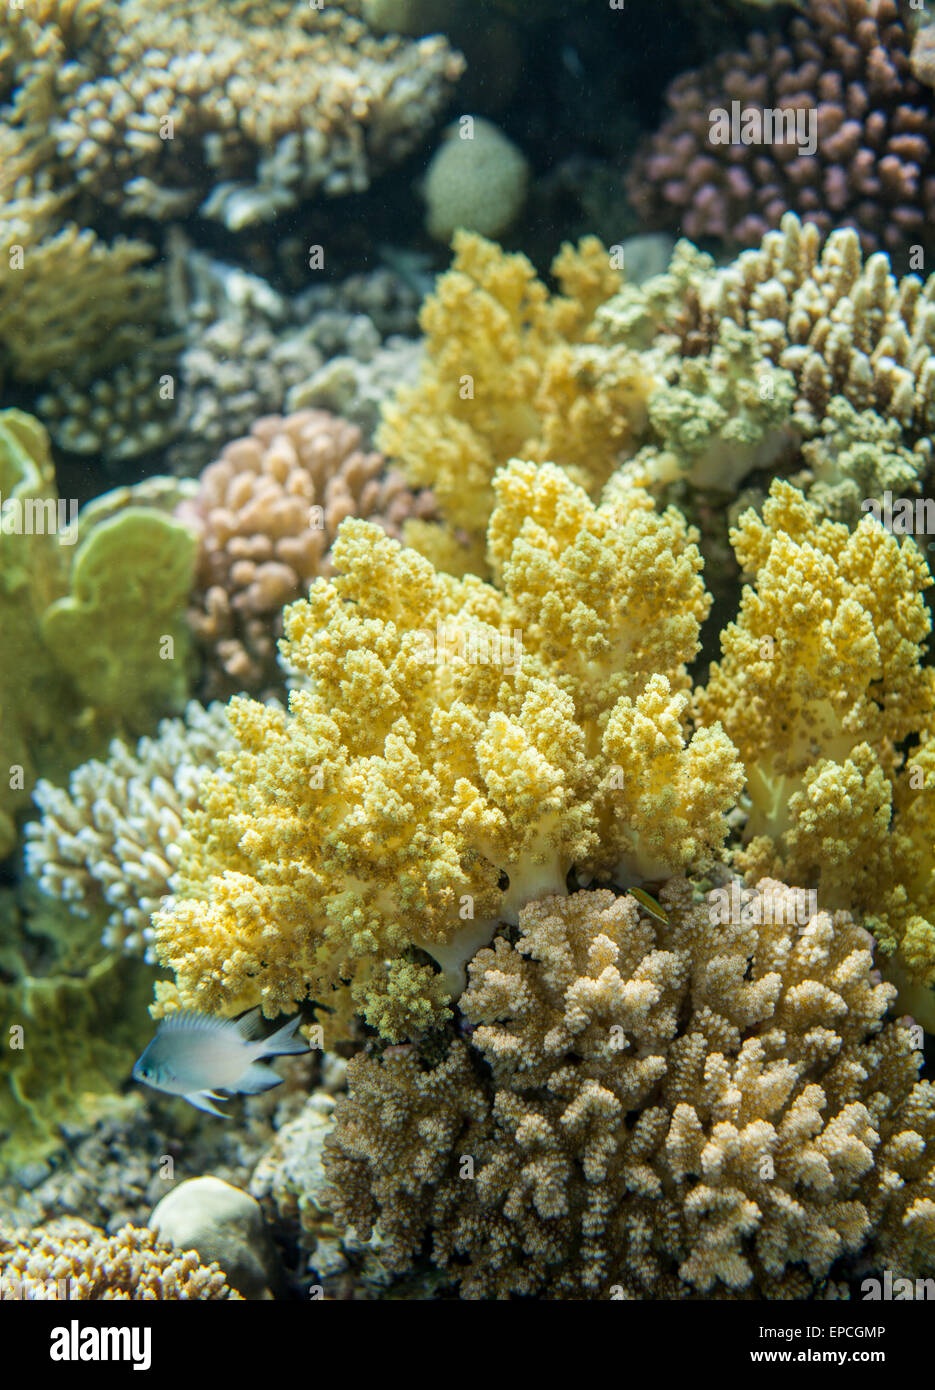 red sea reef and yellow broccoli coral Stock Photo